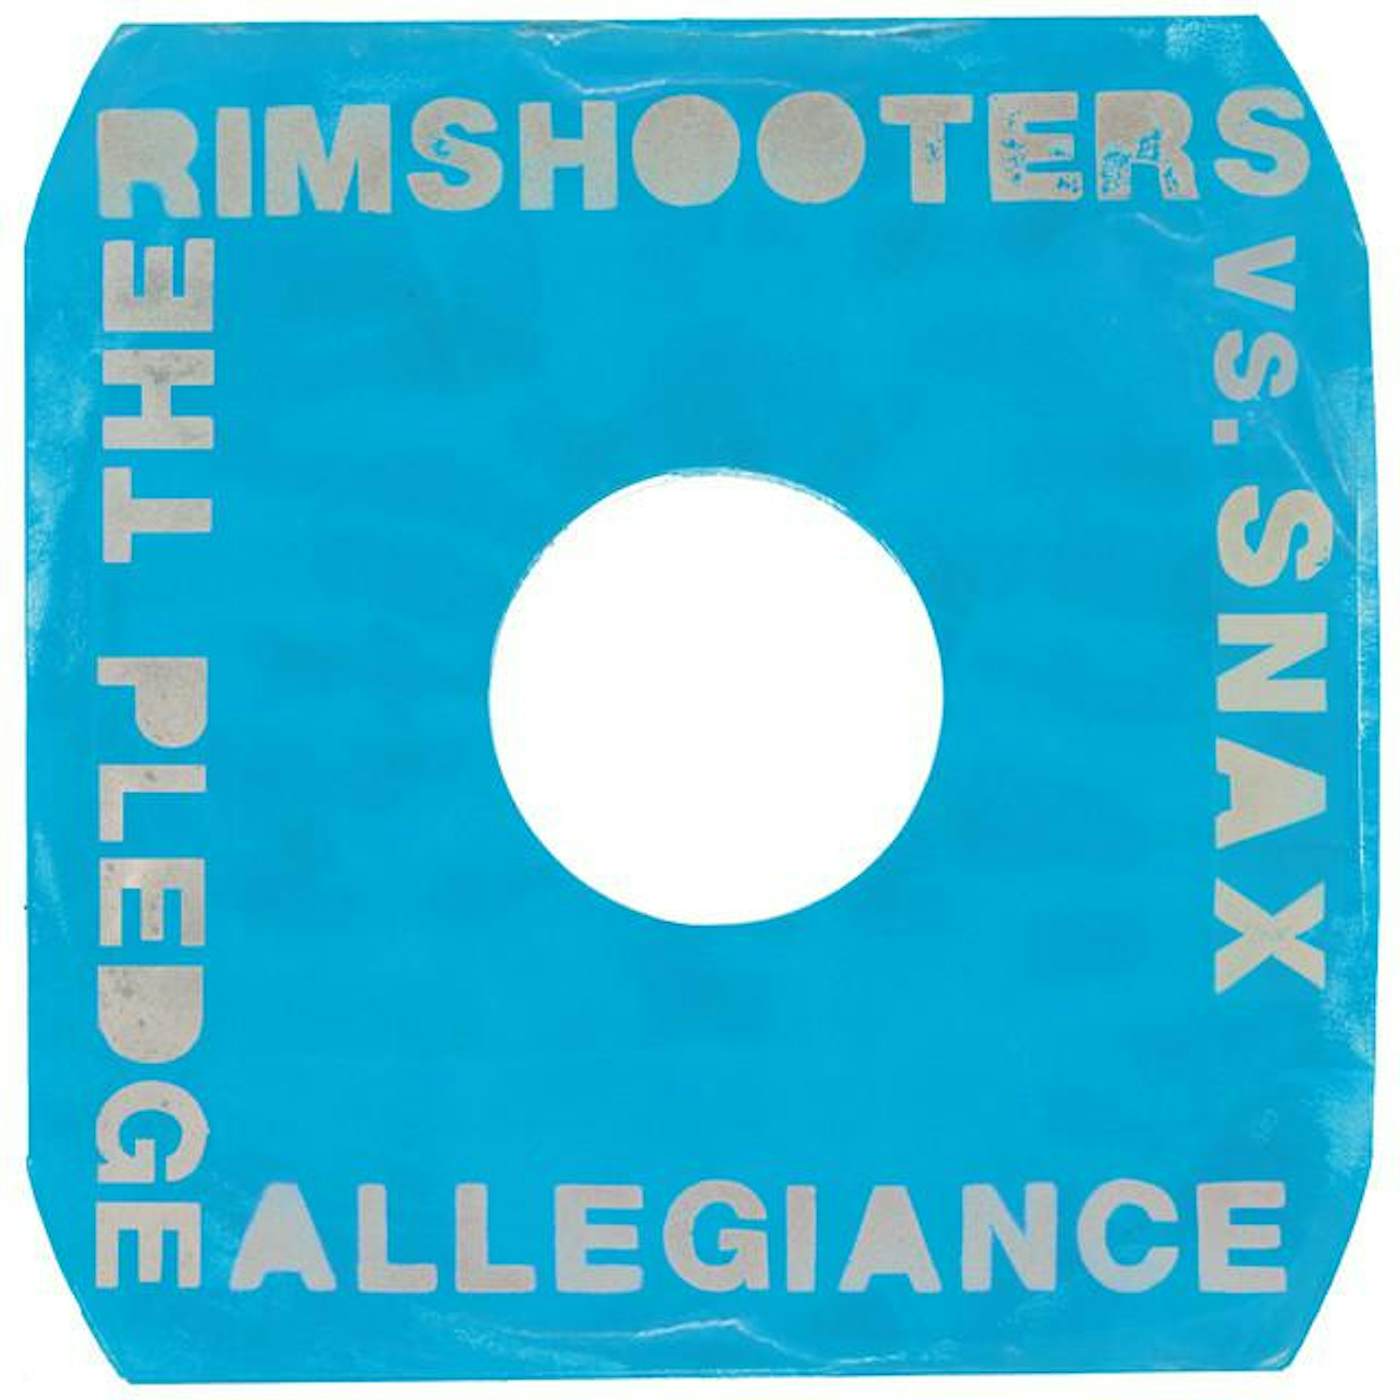 The Rimshooters